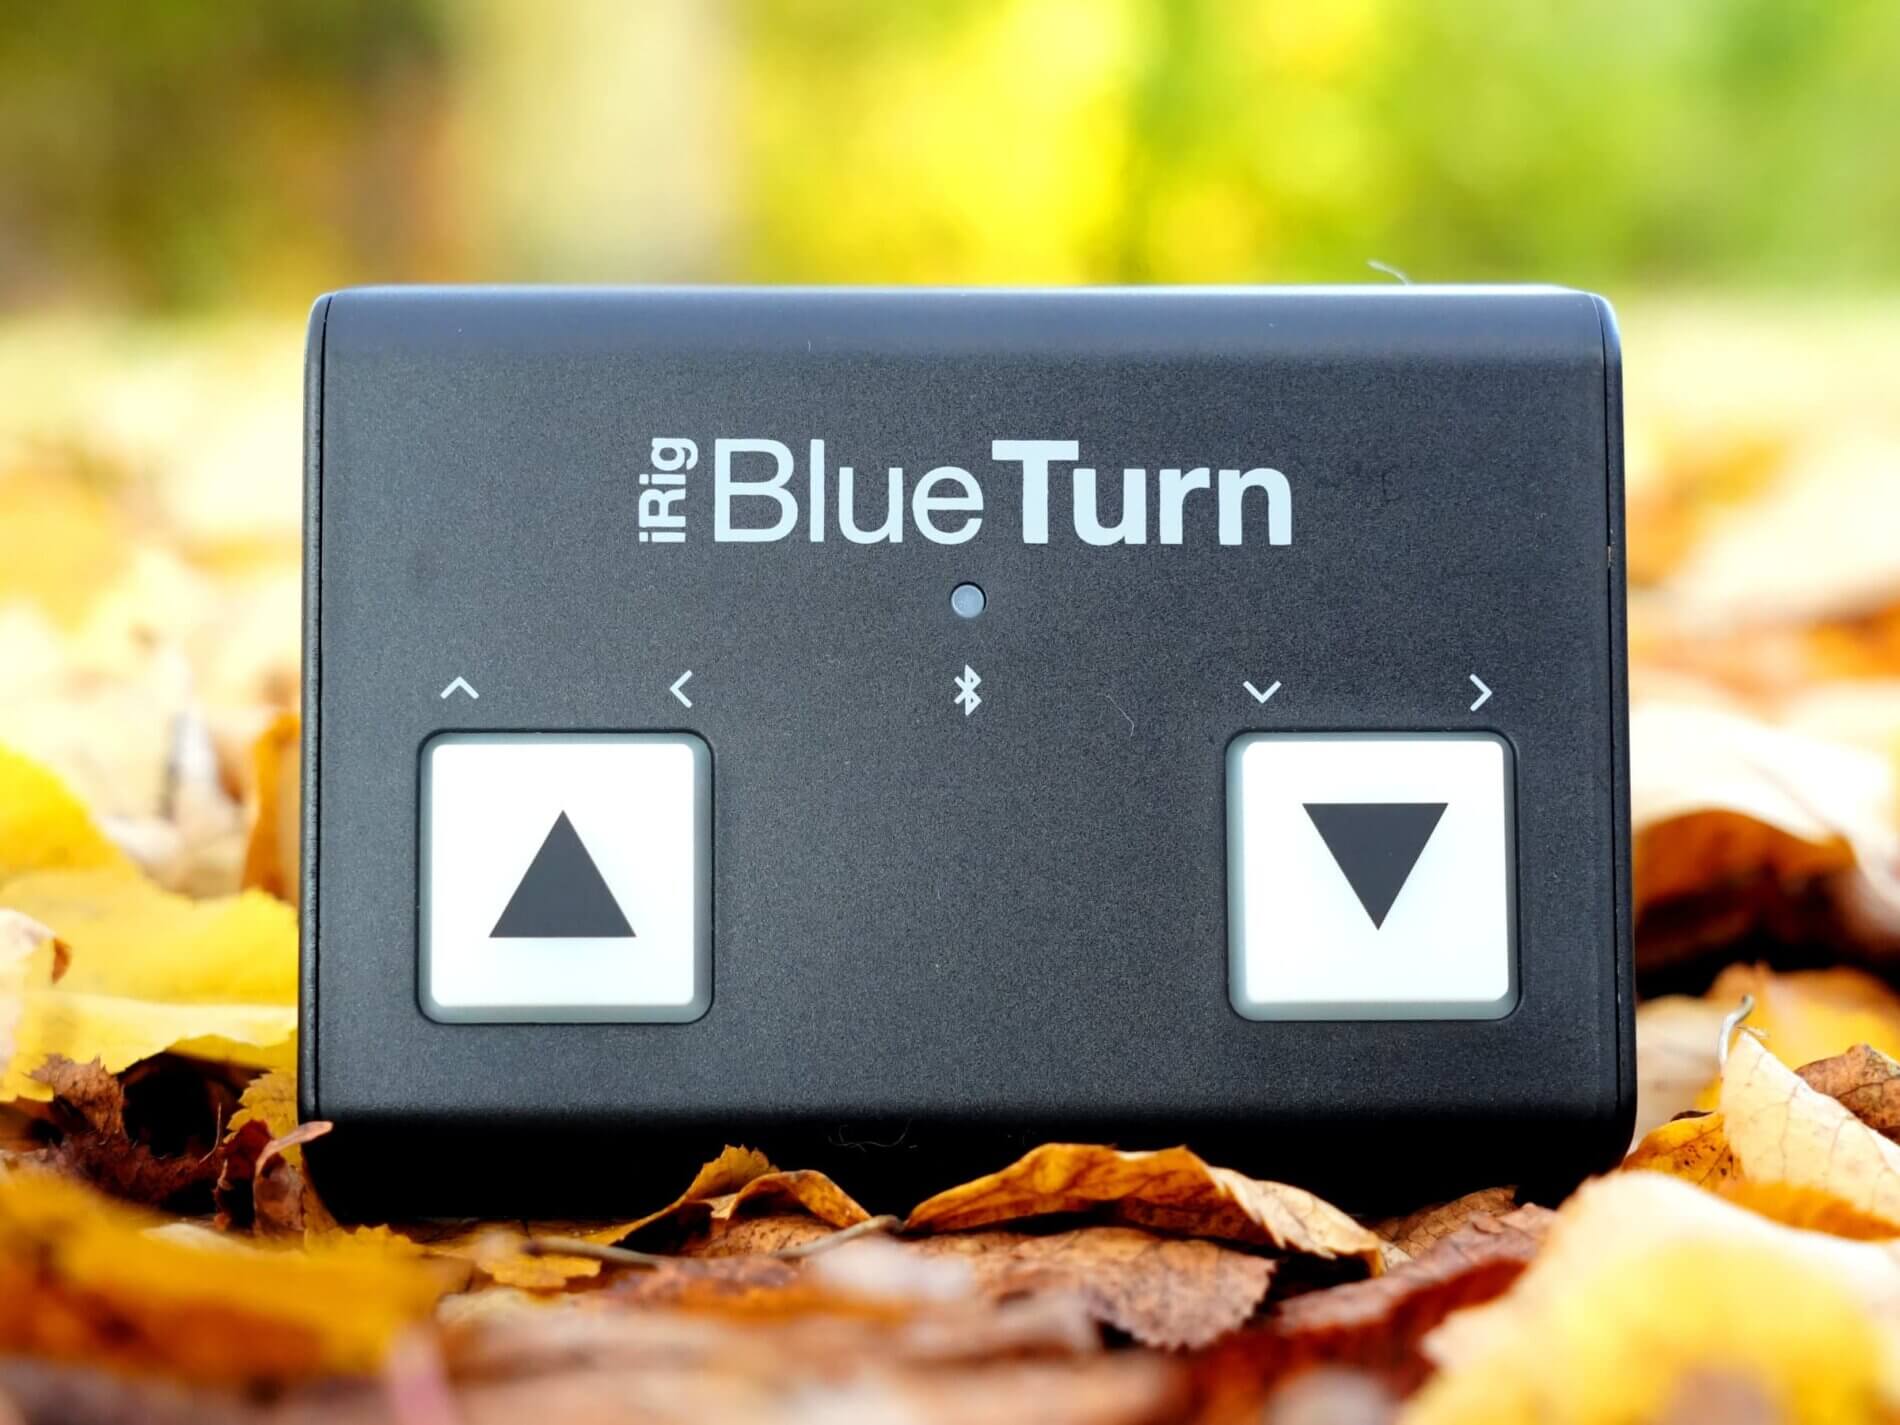 Bluetooth page turner, turn pages on iPad and Tablets using your feet - iRig Blue Turn (IK Multimedia)